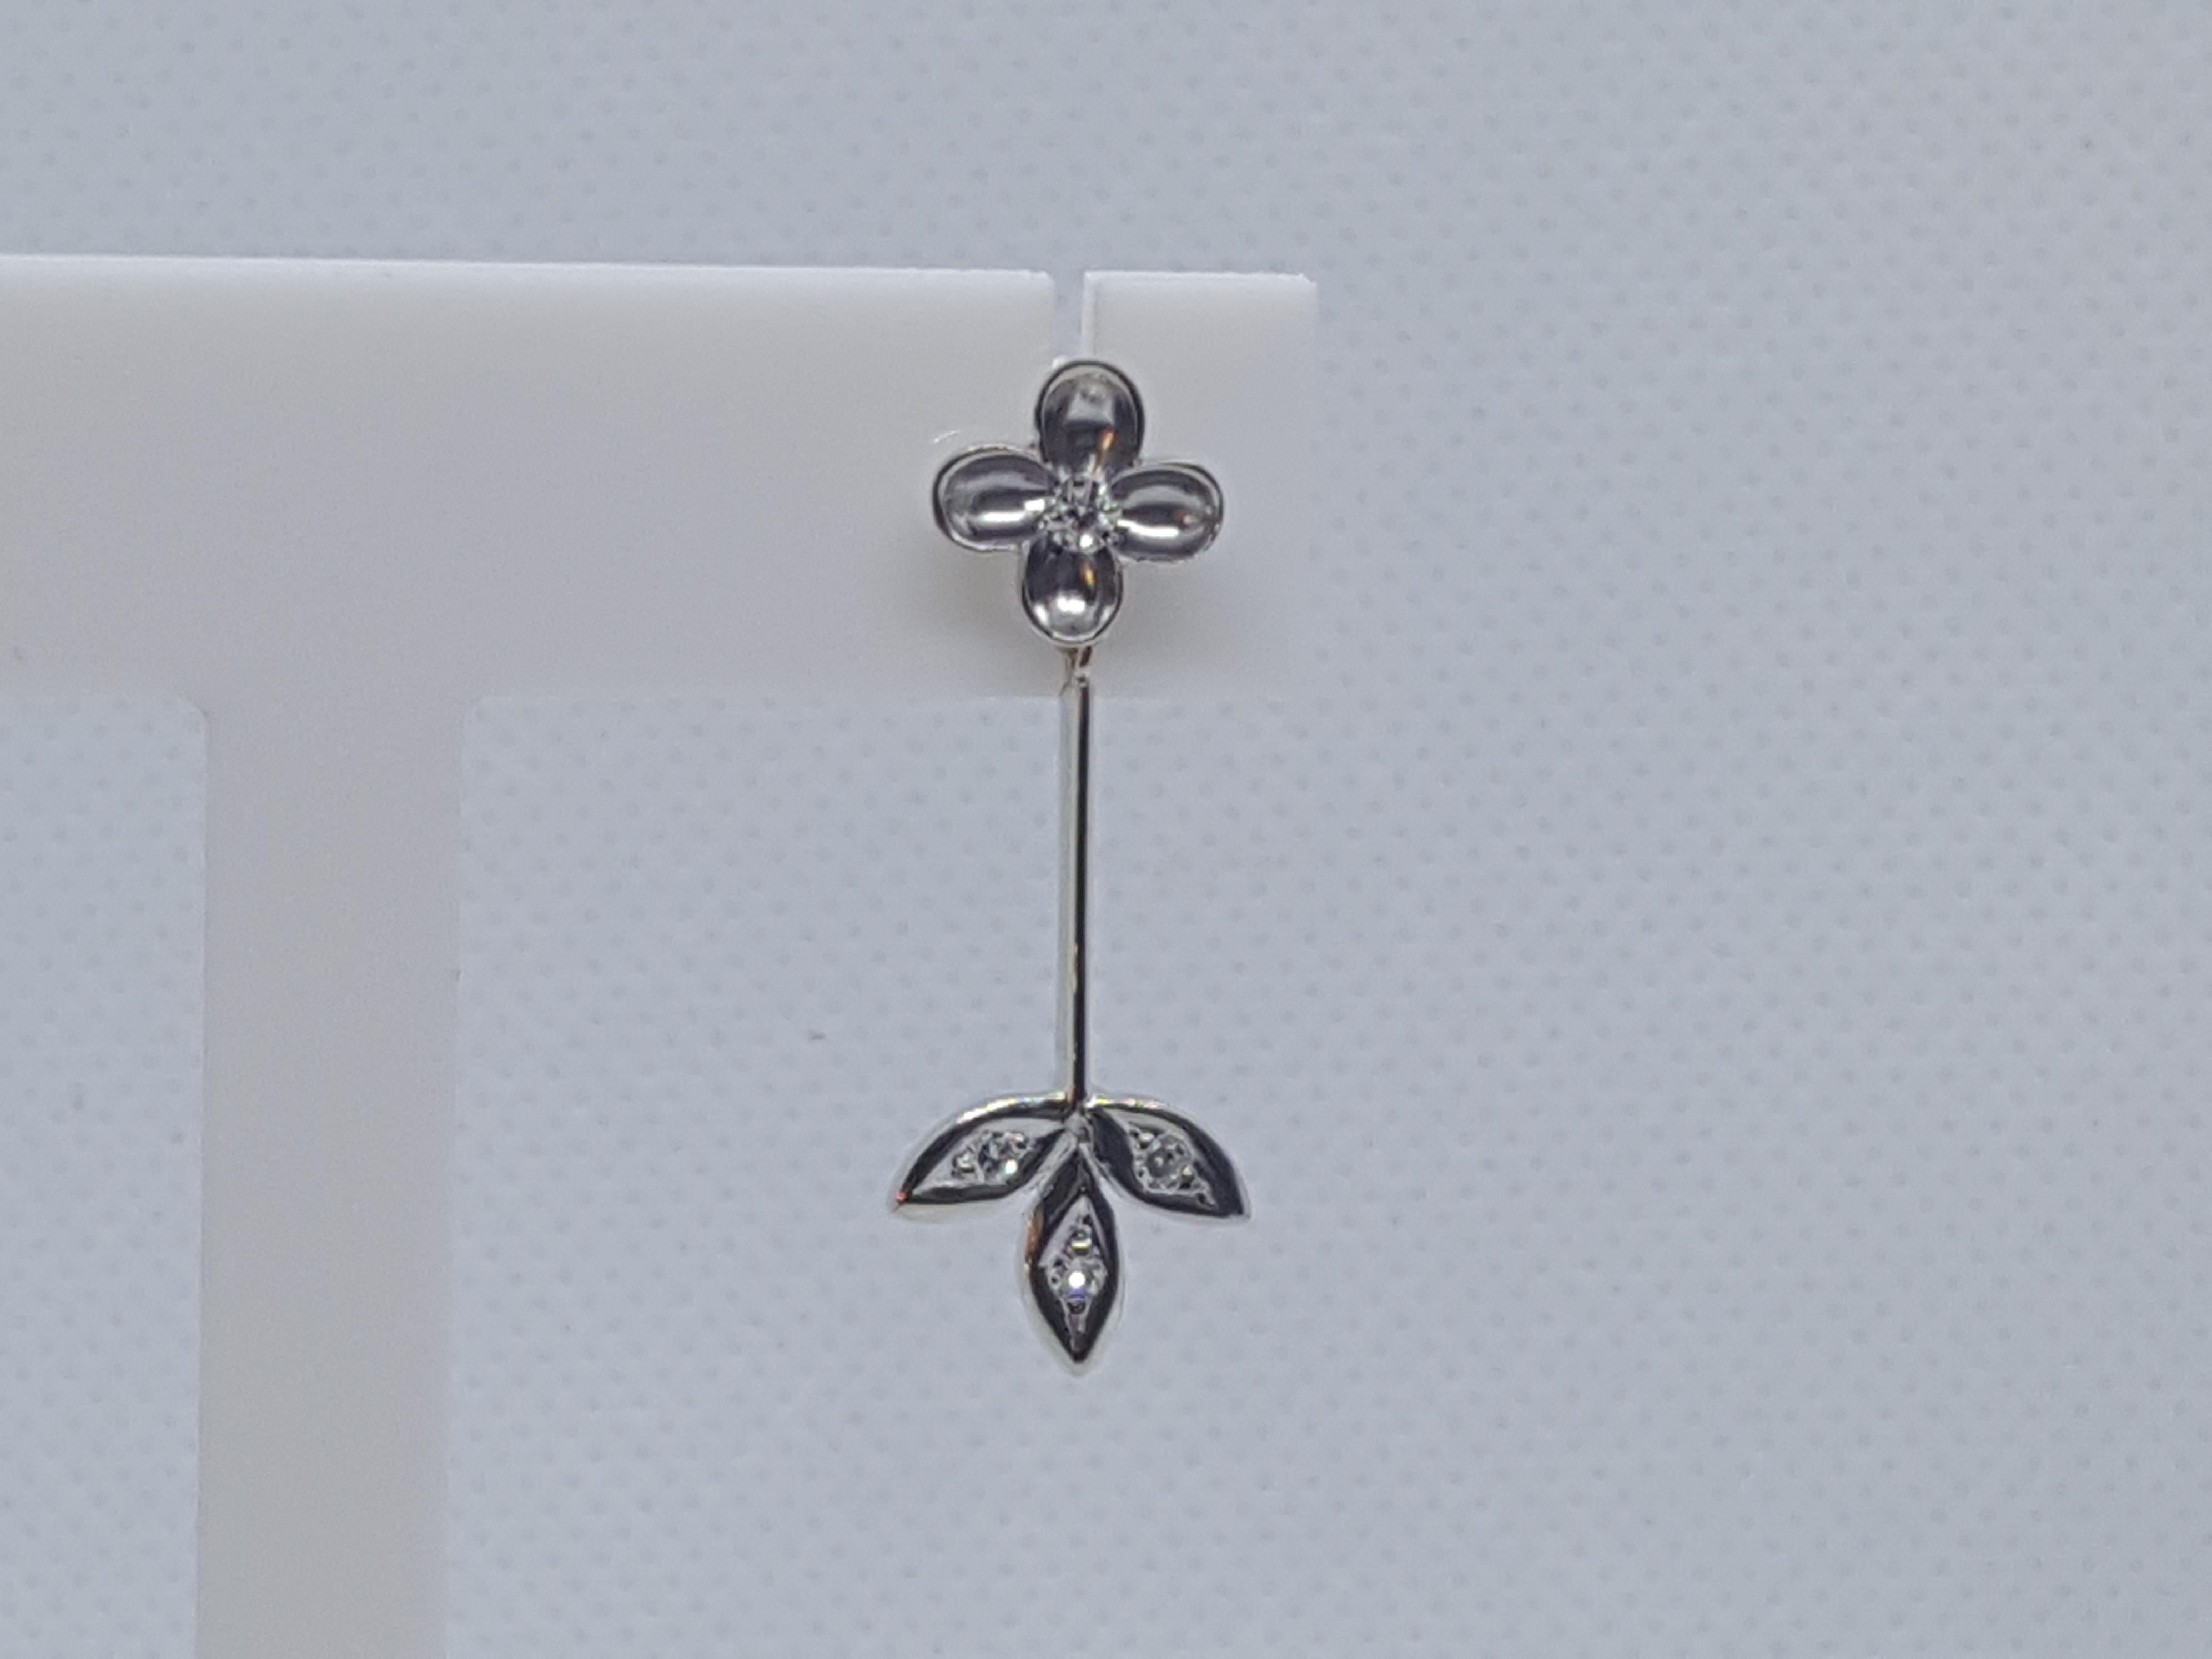 earrings that dangle from the back